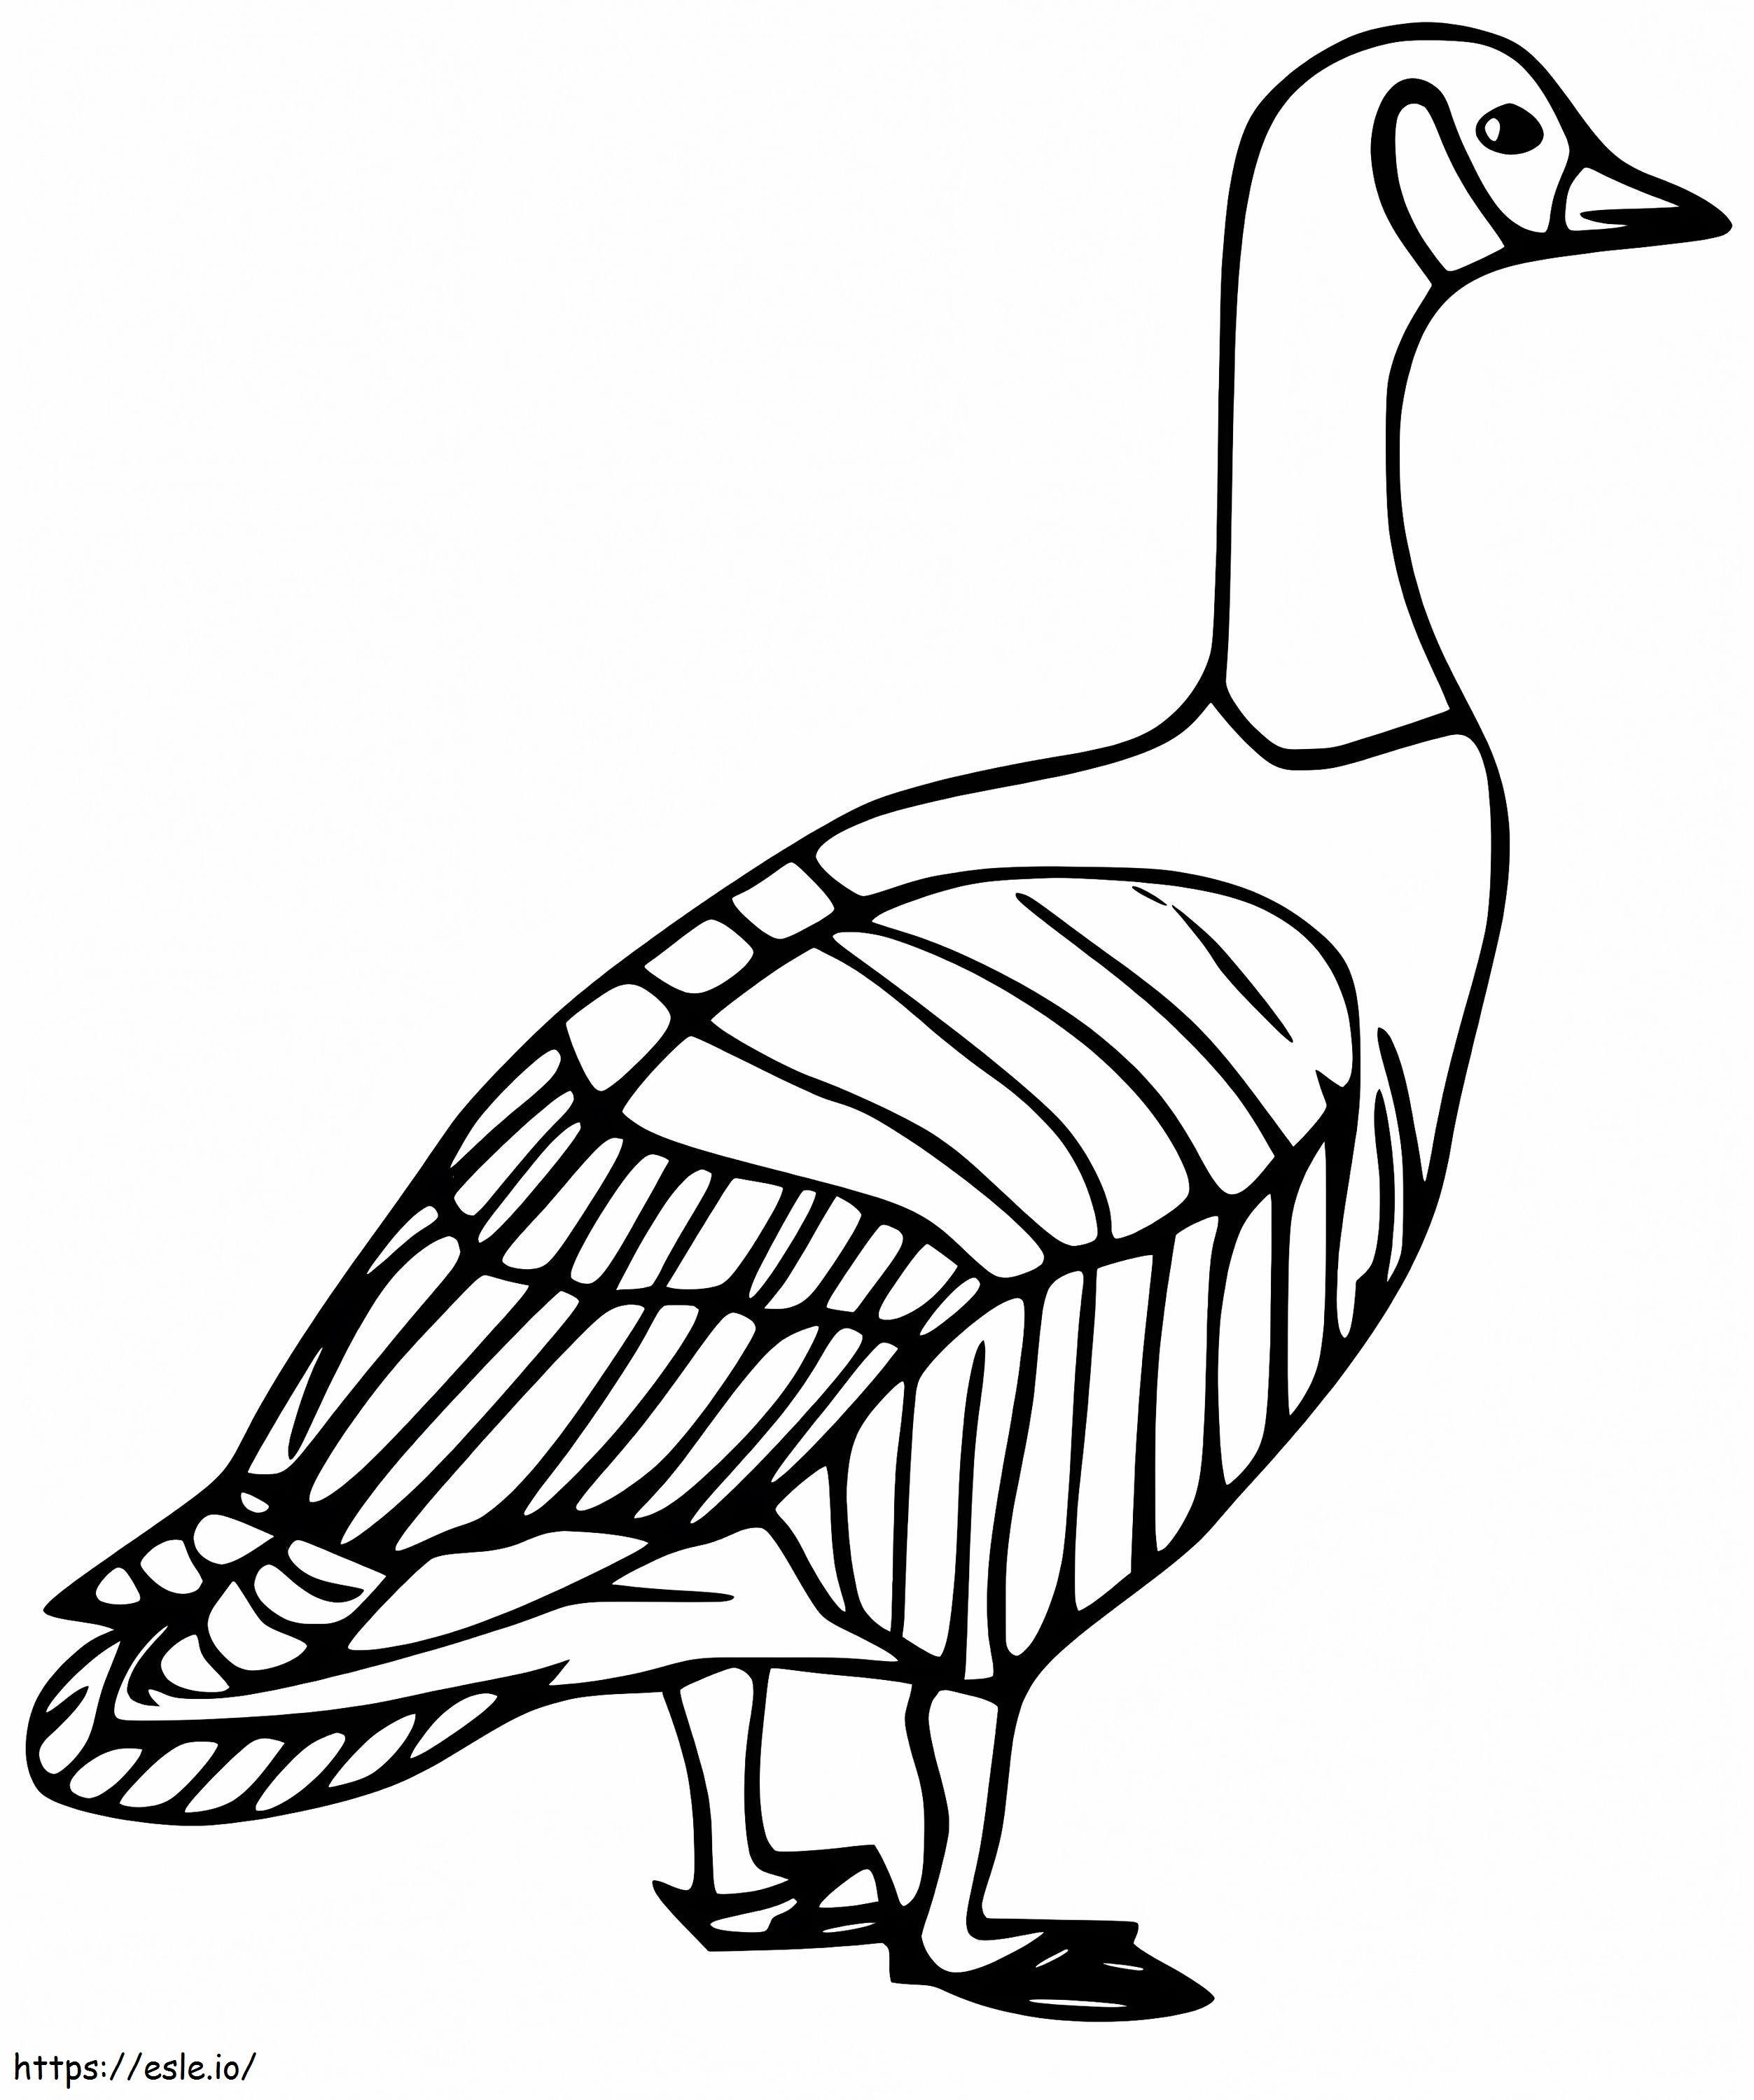 Goose 6 coloring page